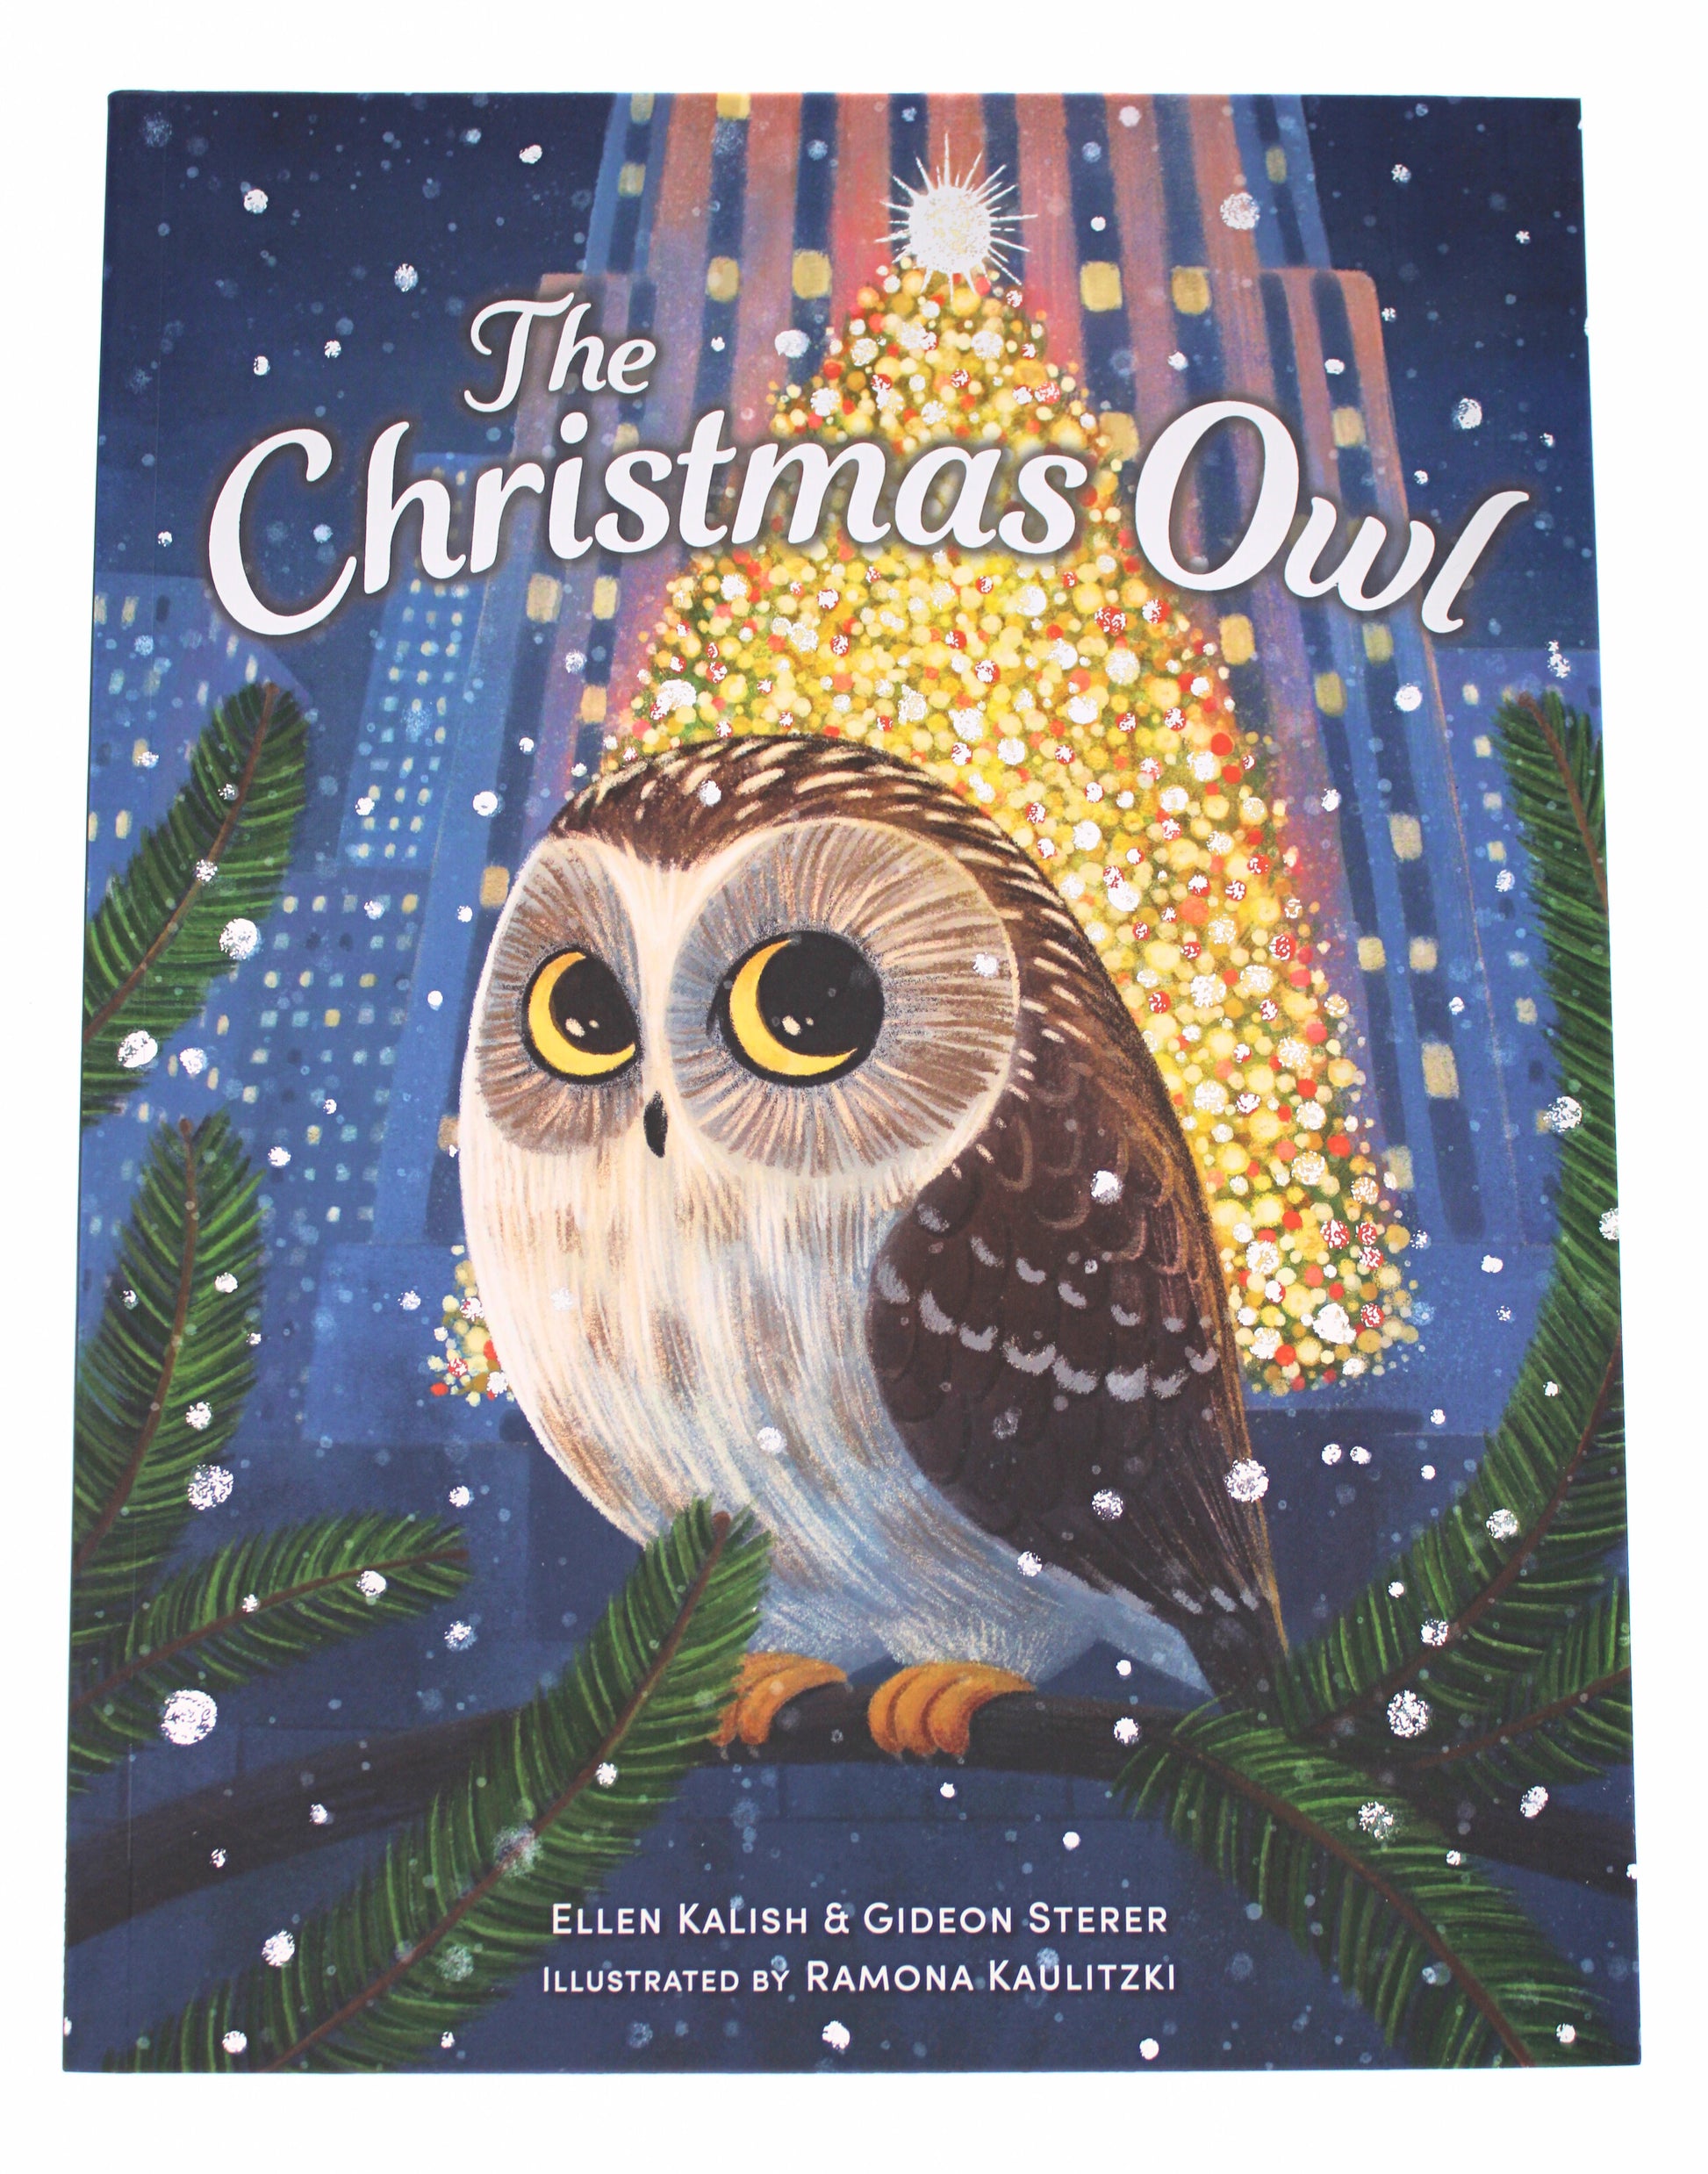 The Christmas Owl by Ellen Kalish and Gideon Sterer